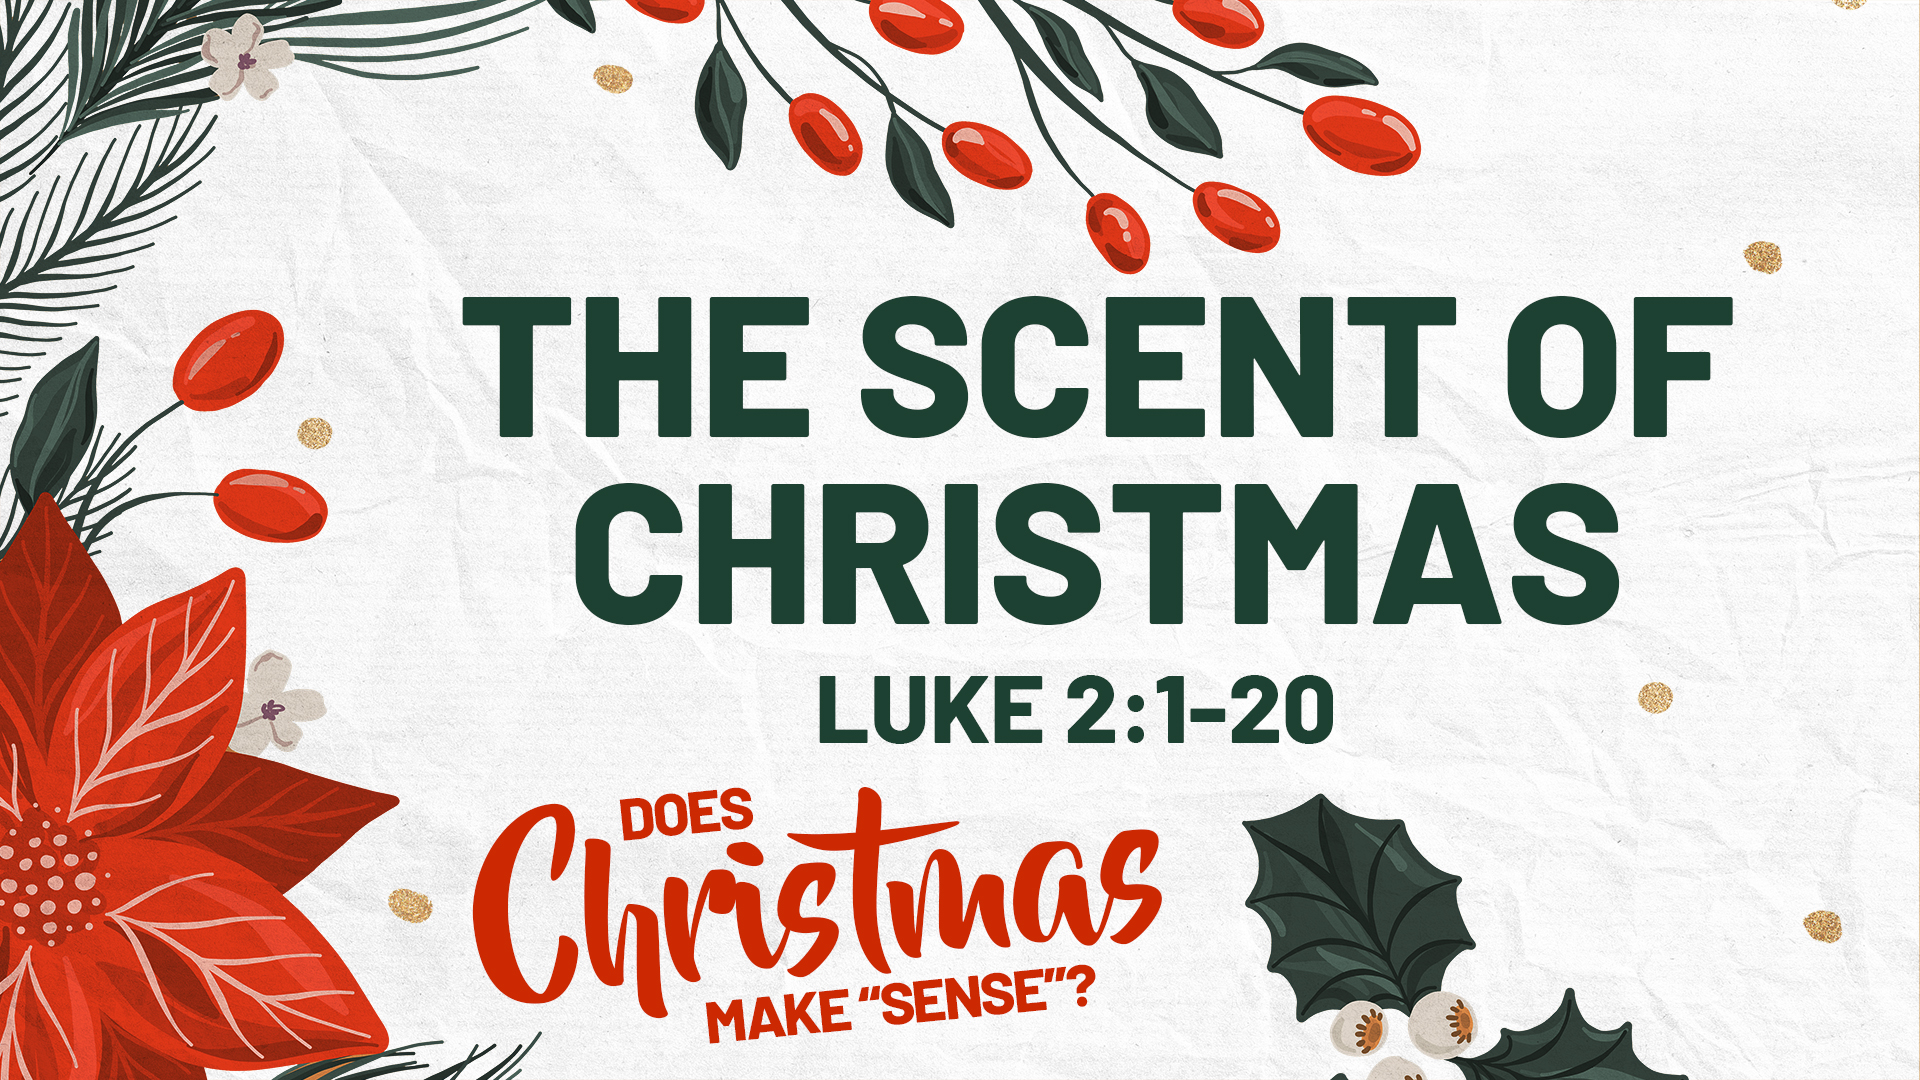 The Scent of Christmas